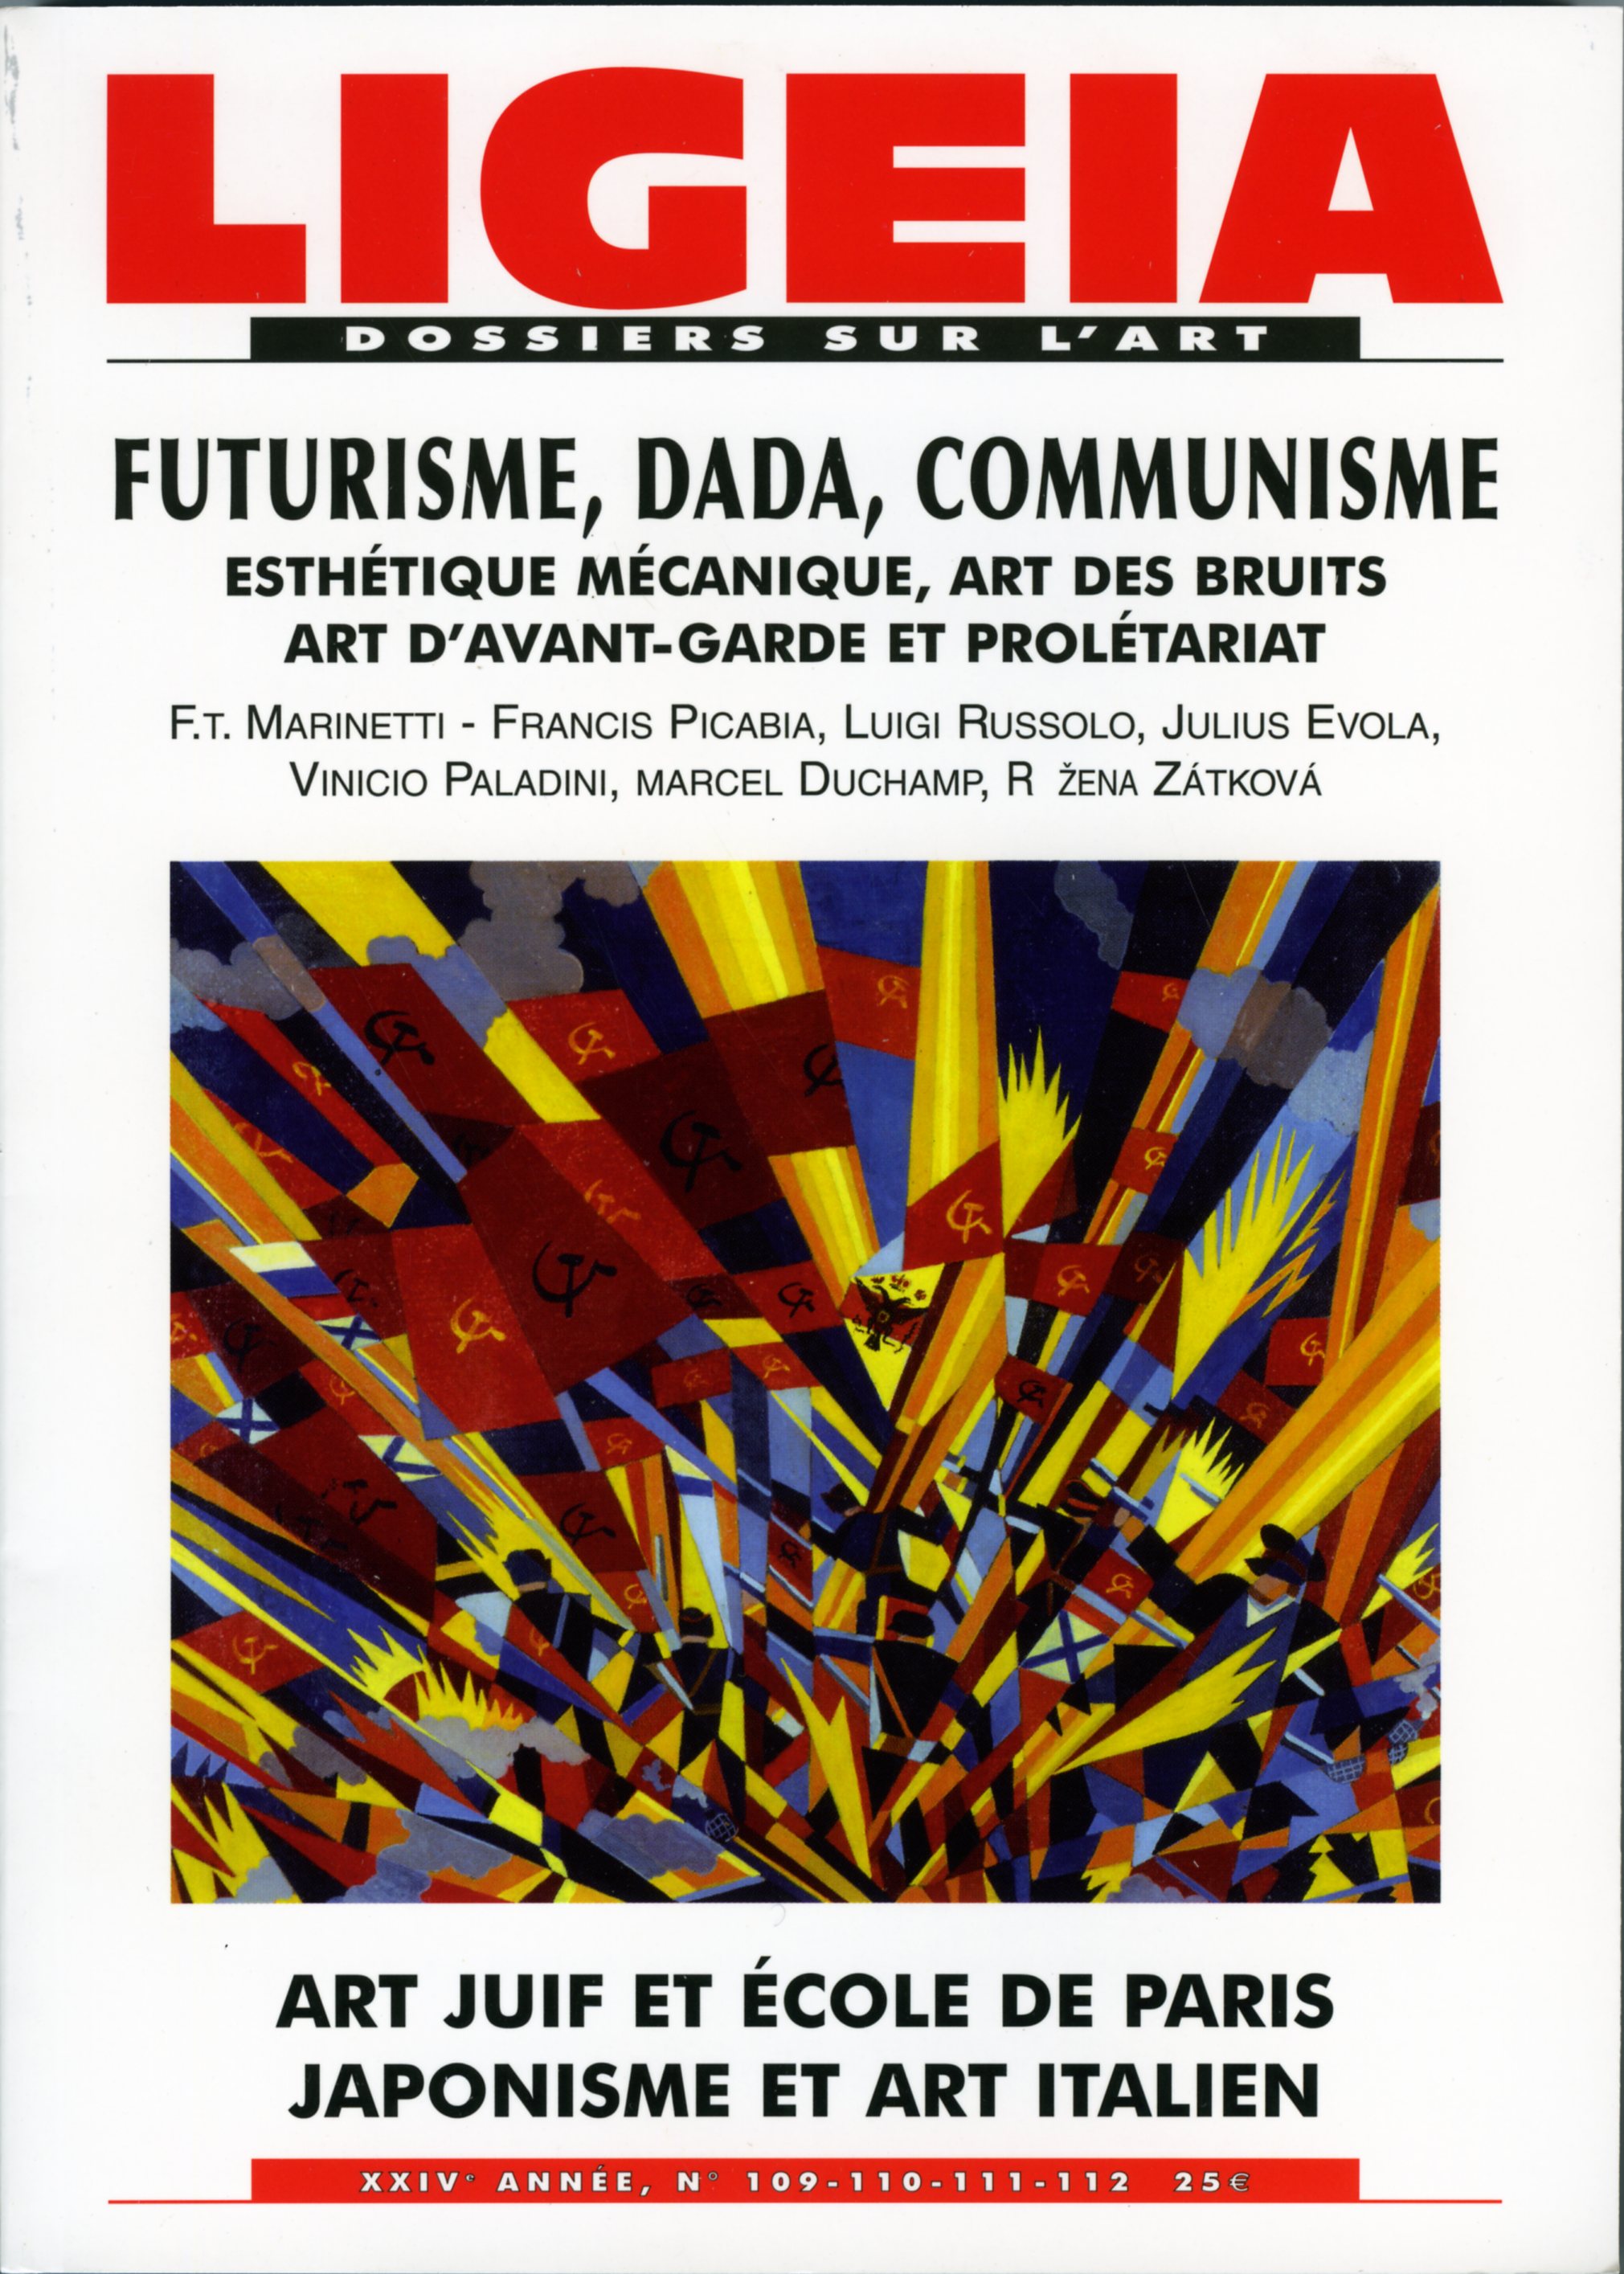 French Magazine features Futurism in December issue